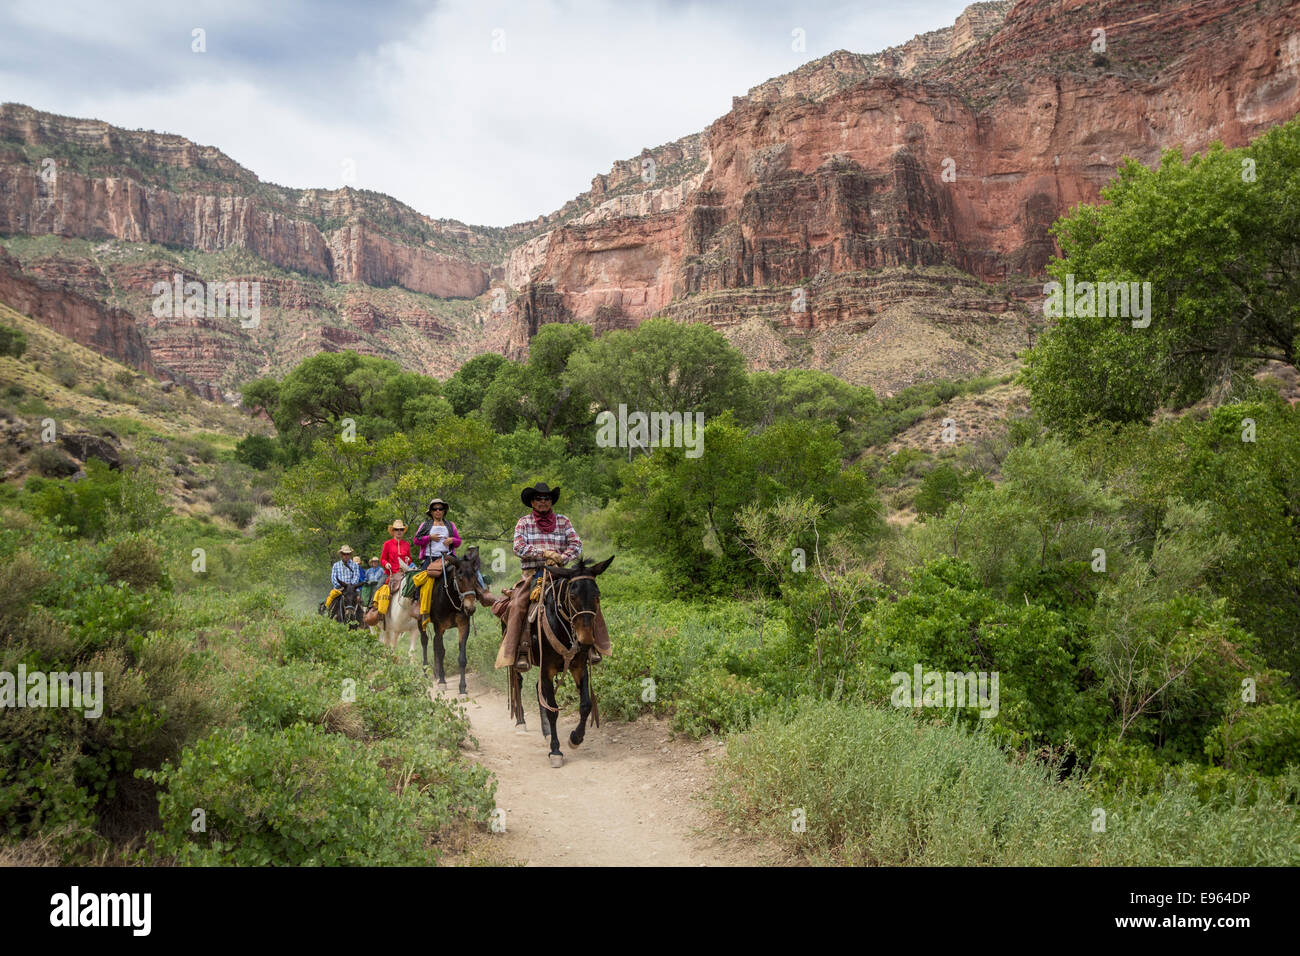 Mule riders on the Bright Angel Trail, Grand Canyon National Park, Arizona. Stock Photo